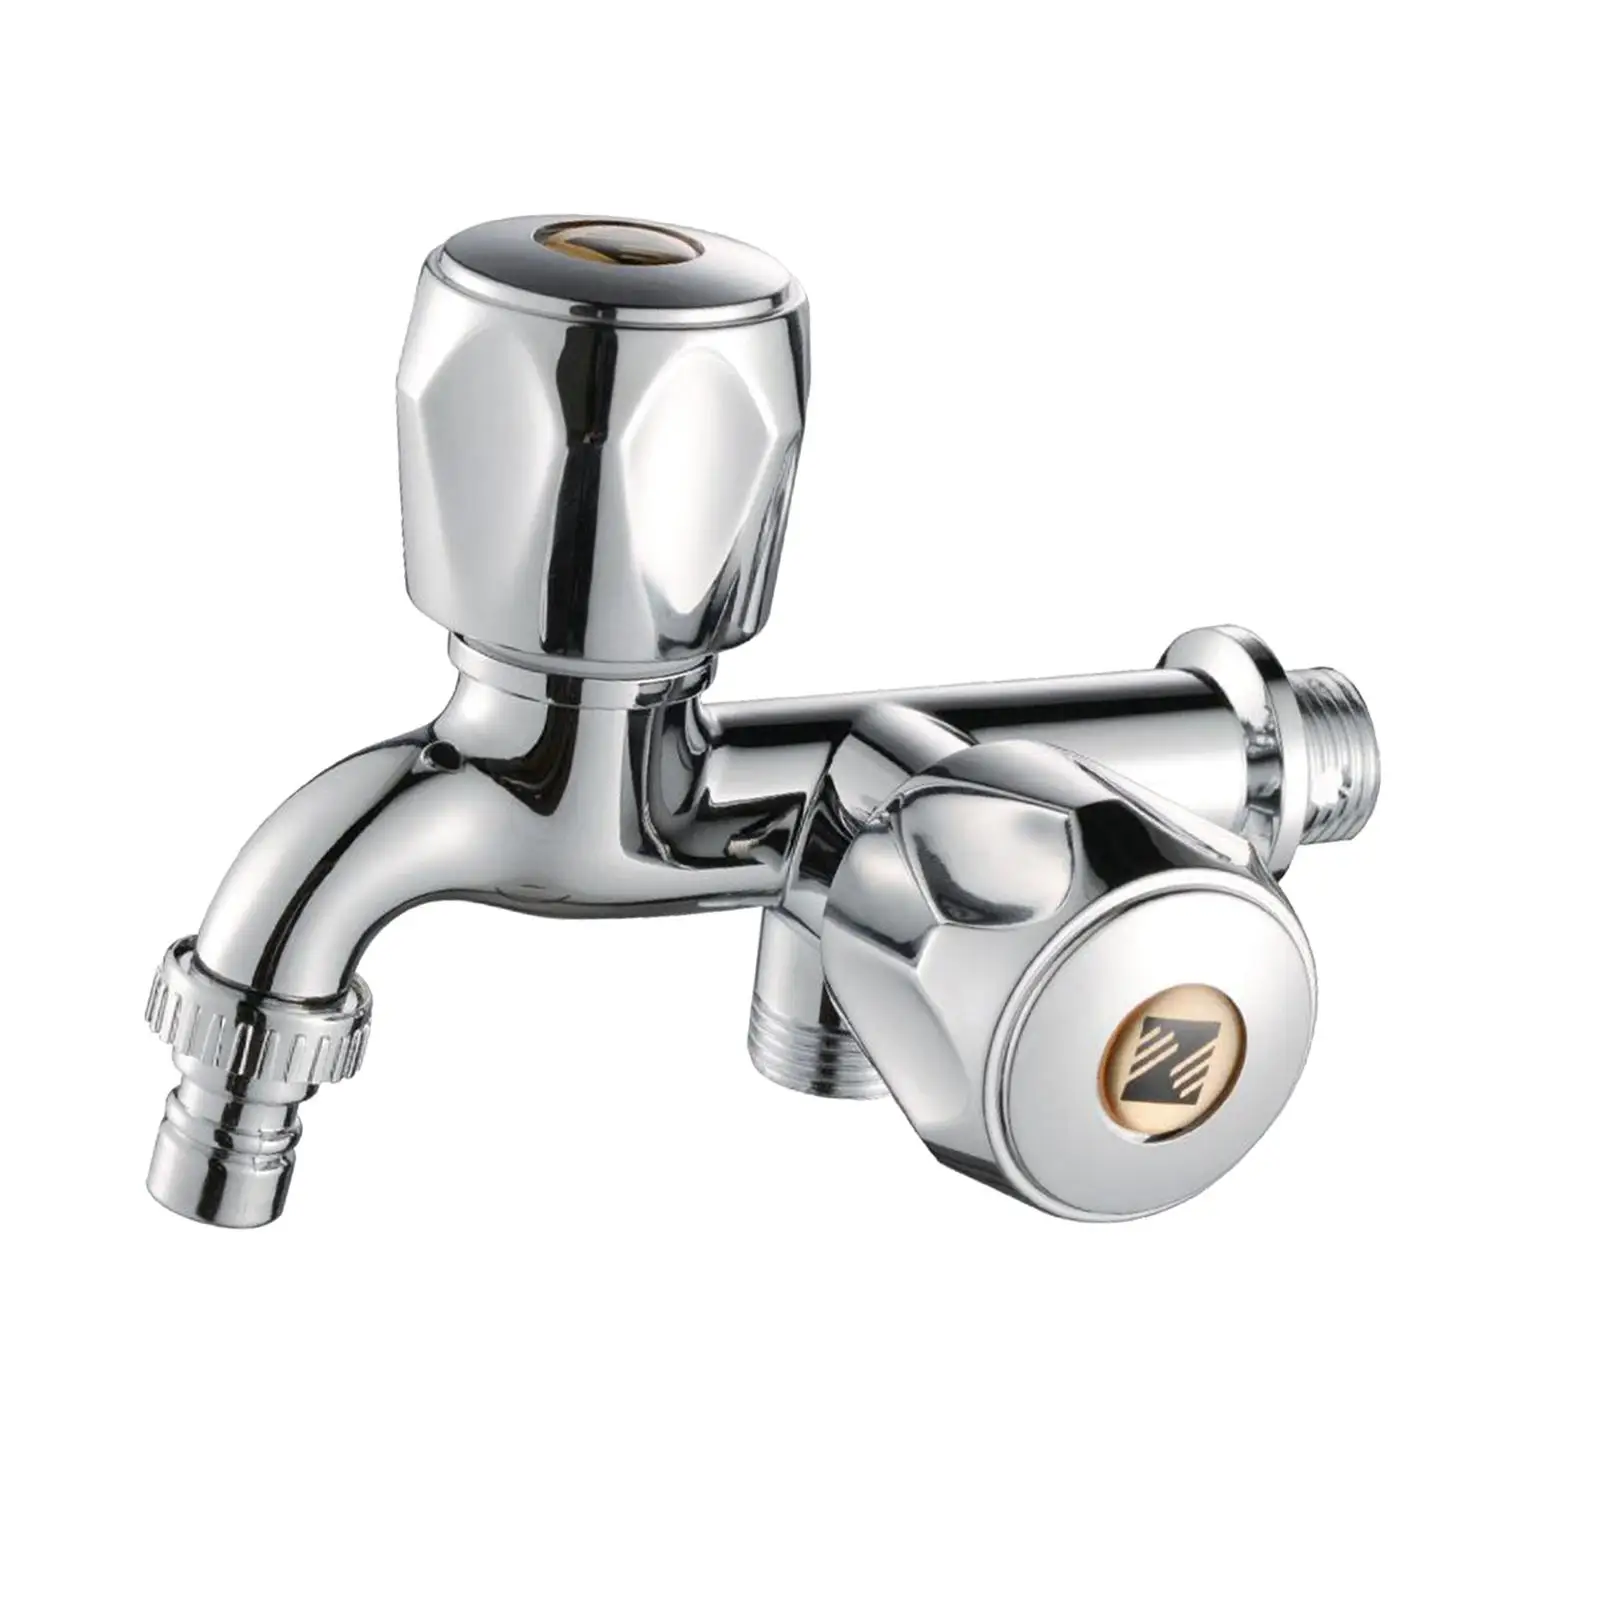 Water Faucet for Washing Machine G1/2 Water Tap Faucet for Laundry Room Pool